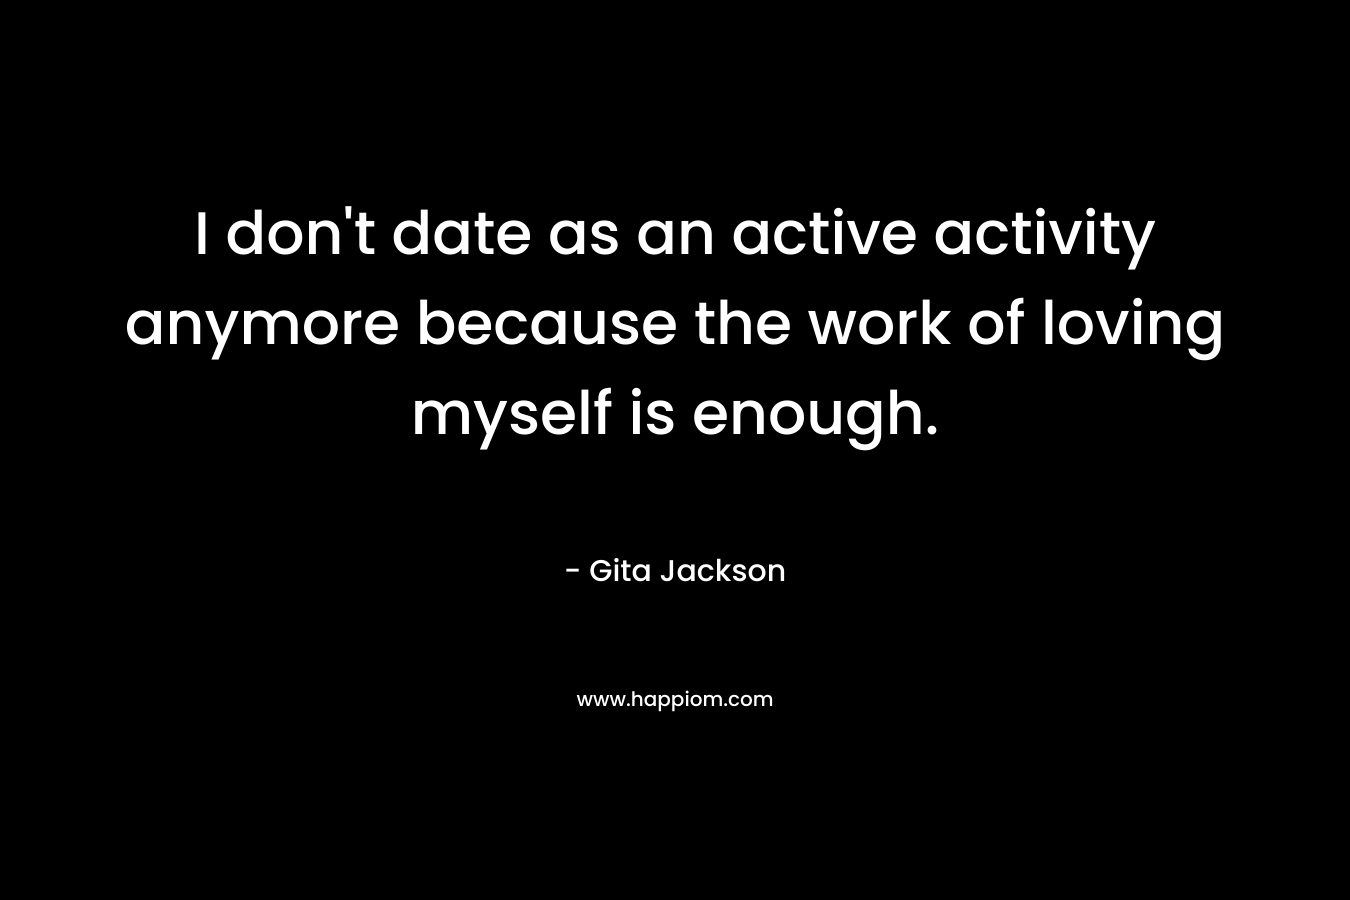 I don’t date as an active activity anymore because the work of loving myself is enough. – Gita Jackson